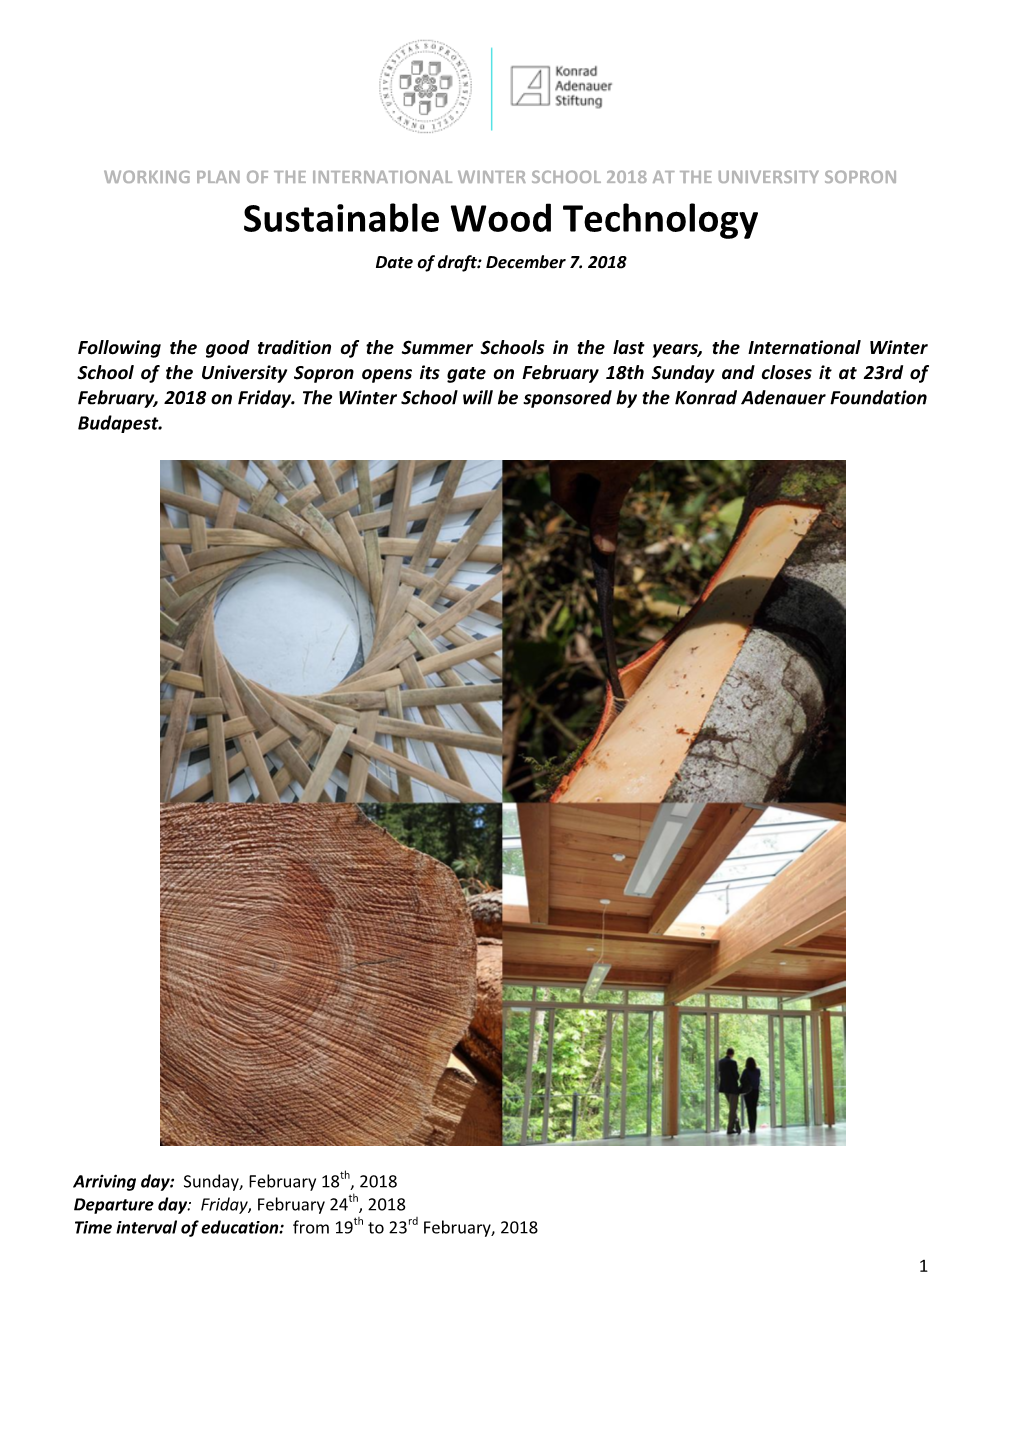 Sustainable Wood Technology Date of Draft: December 7